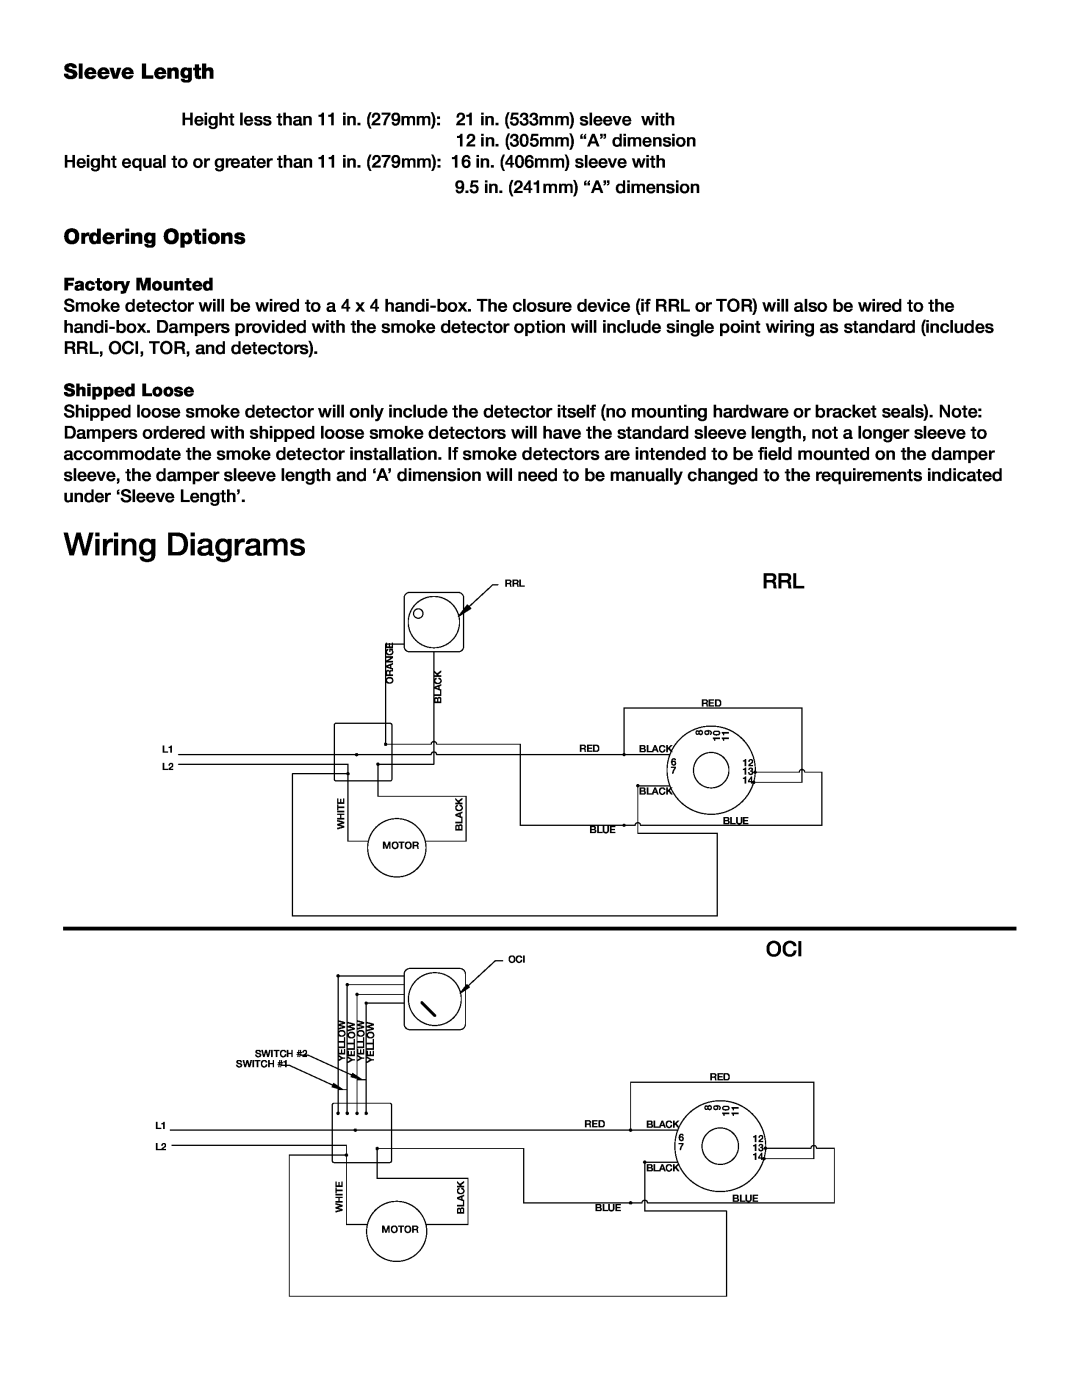 Greenheck Fan No Flow Duct Smoke Detector Wiring Diagrams, Sleeve Length, Ordering Options, Factory Mounted, Shipped Loose 